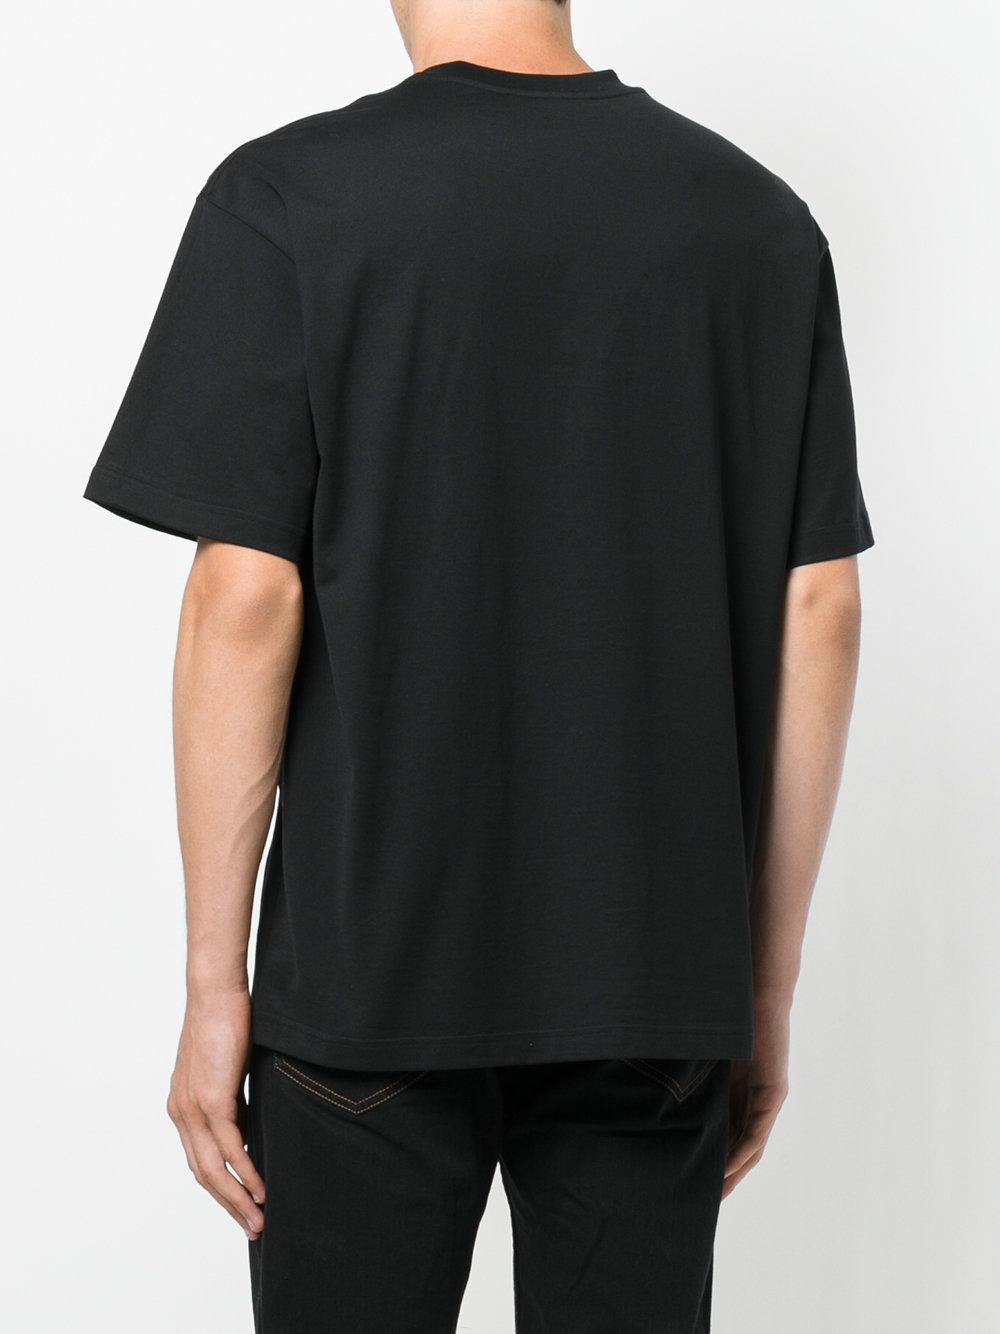 Y. Project Cotton Printed T-shirt in Black for Men - Lyst